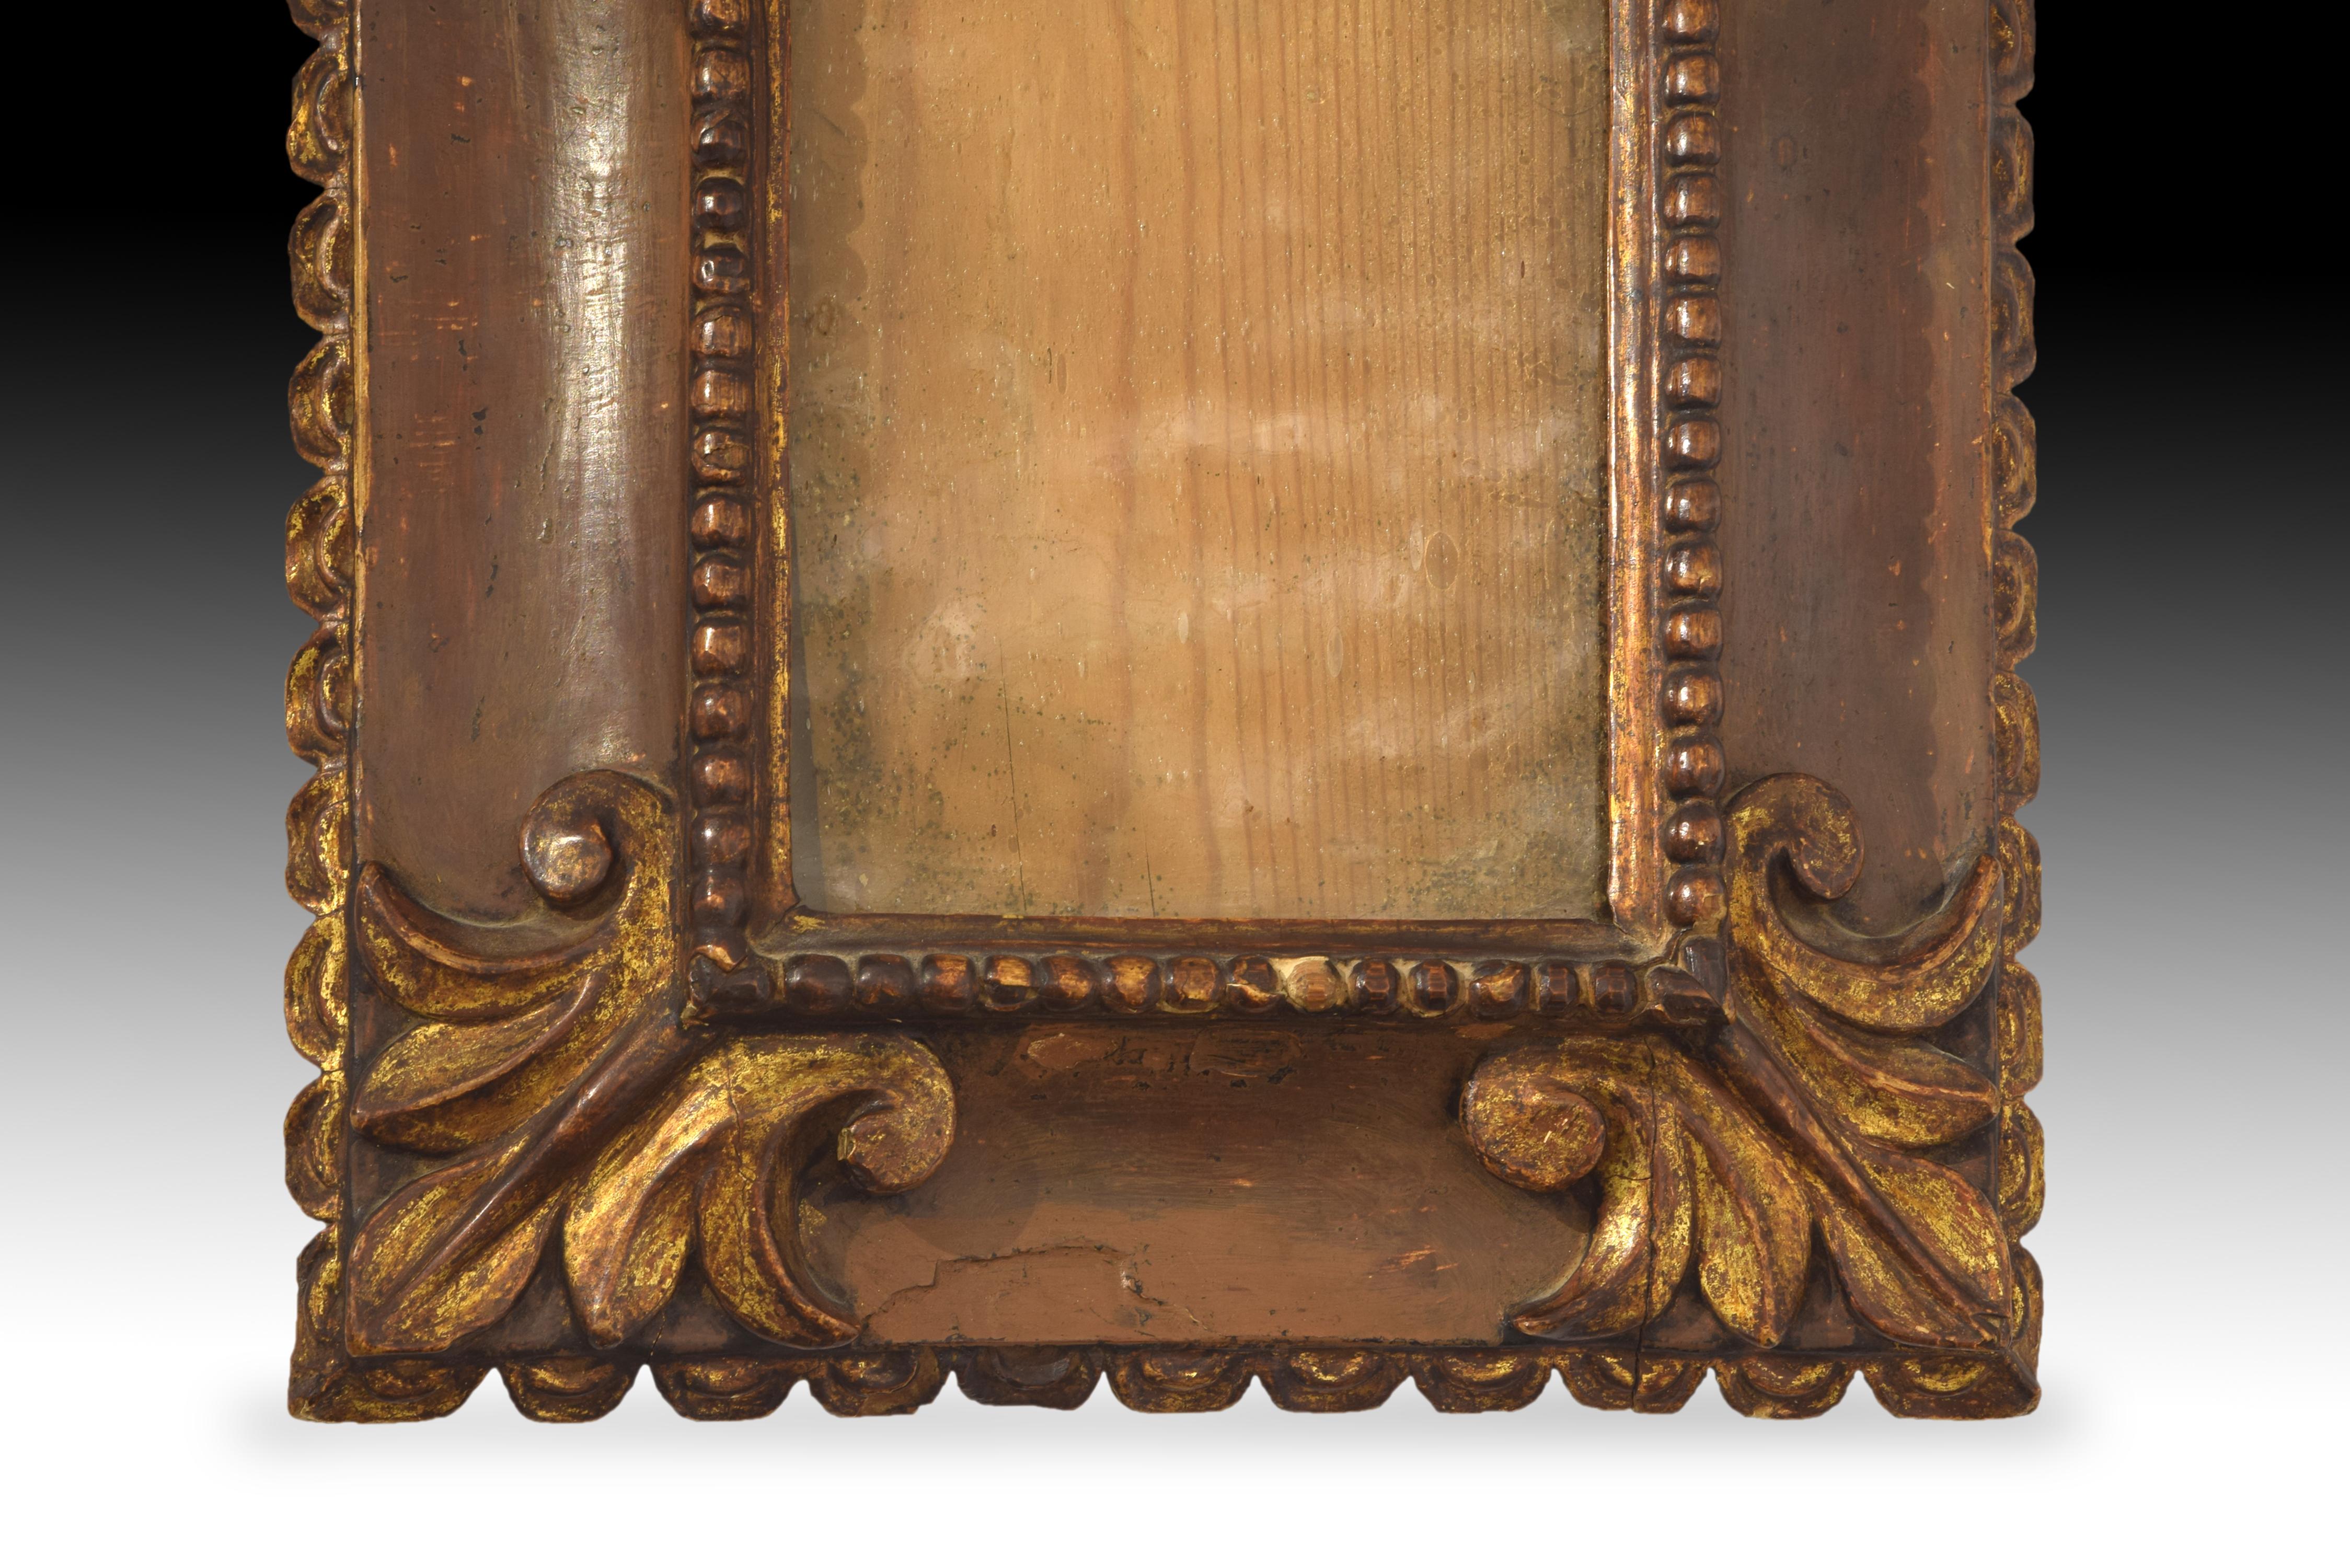 Rectangular frame of carved wood decorated with reliefs arranged in three bands (inside, a string of pearls, then a wider band with prominent plant motifs in the corners in symmetrical arrangement, to the outside waves that end in points towards the